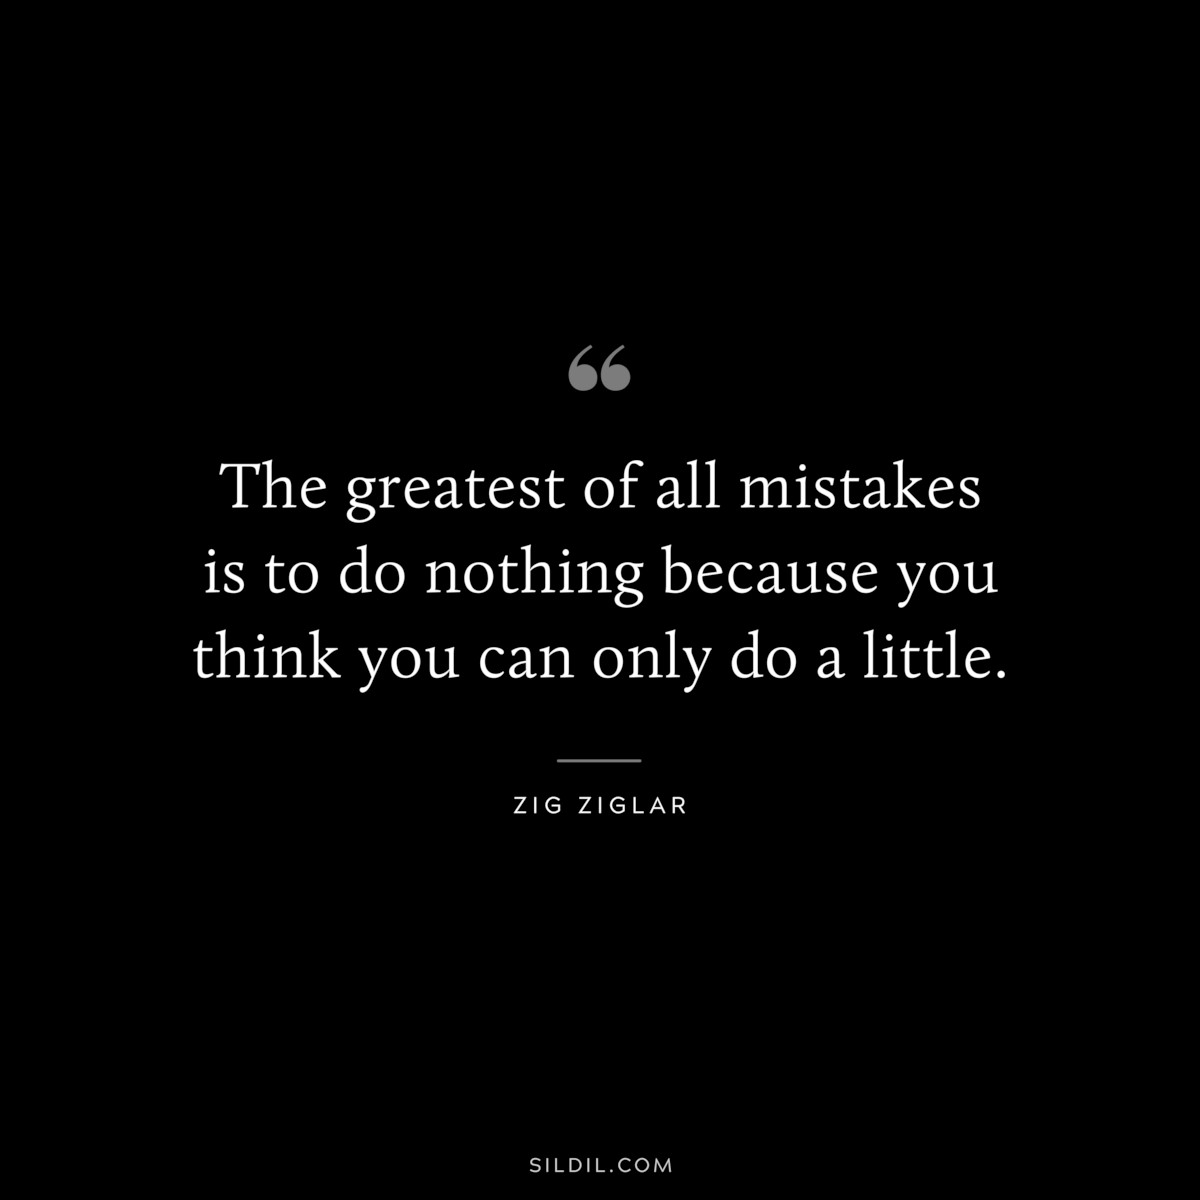 The greatest of all mistakes is to do nothing because you think you can only do a little. ― Zig Ziglar